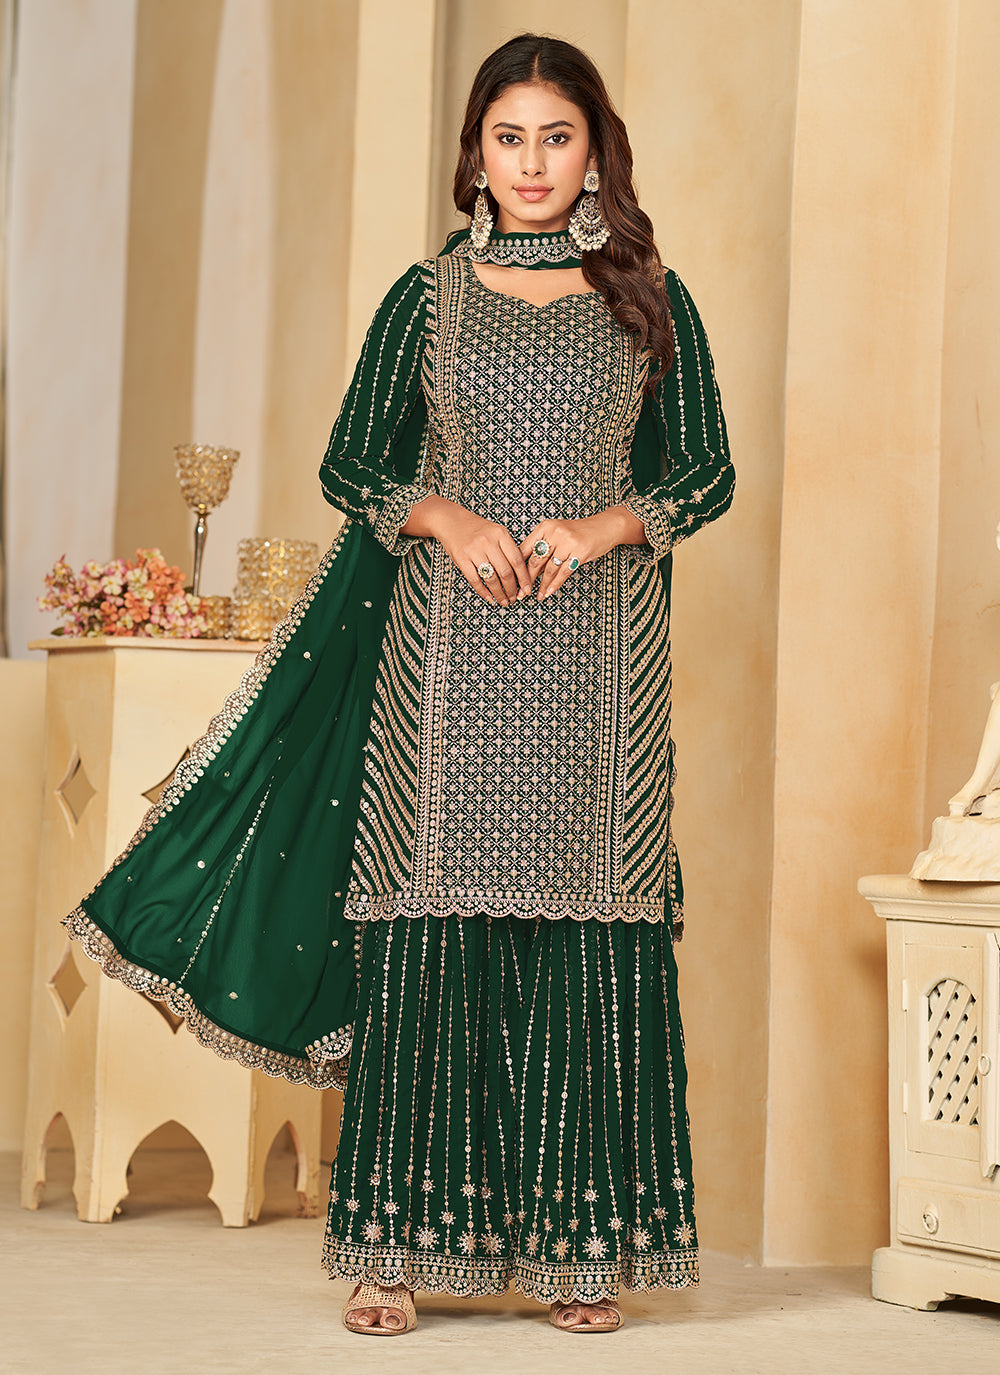 Green Faux Georgette Salwar Suit With Embroidered Work For Engagement